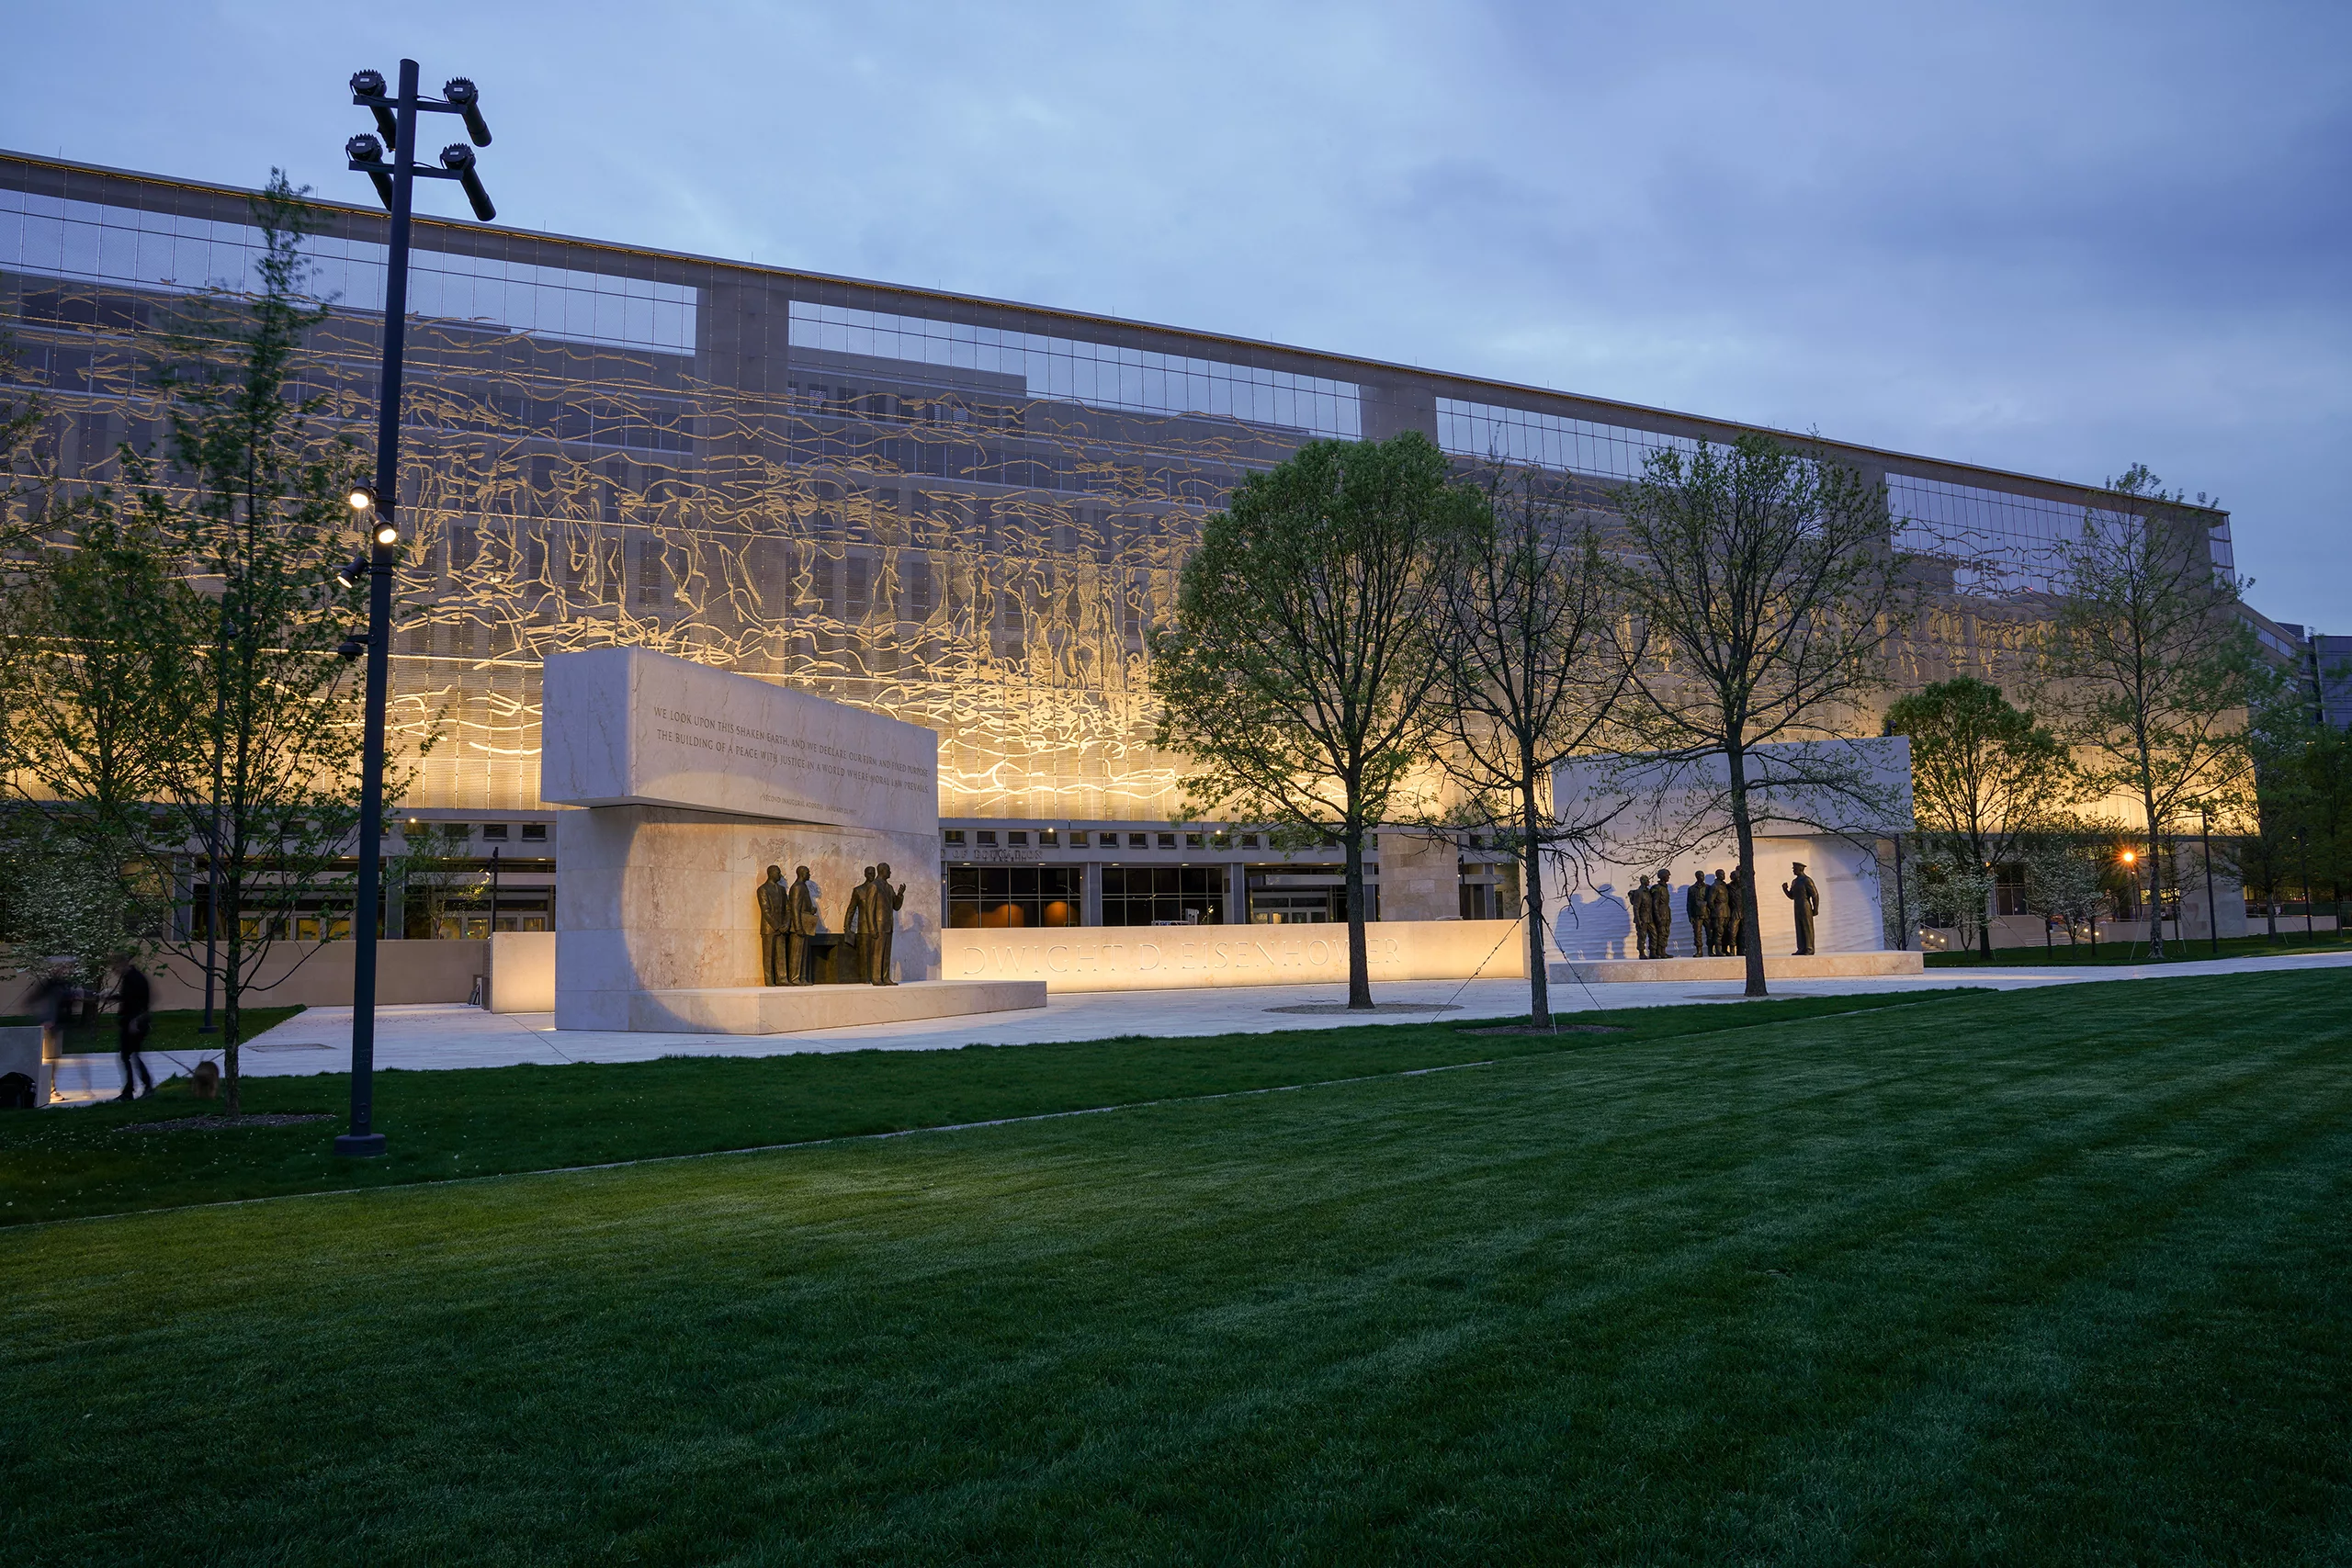 Exterior twilight view of the 80-foot-tall, stainless steel Dwight D. Eisenhower National Memorial featuring dual stone bas-reliefs with engraved quotations and bronze figures, as well as a vast lawn and interspersed trees